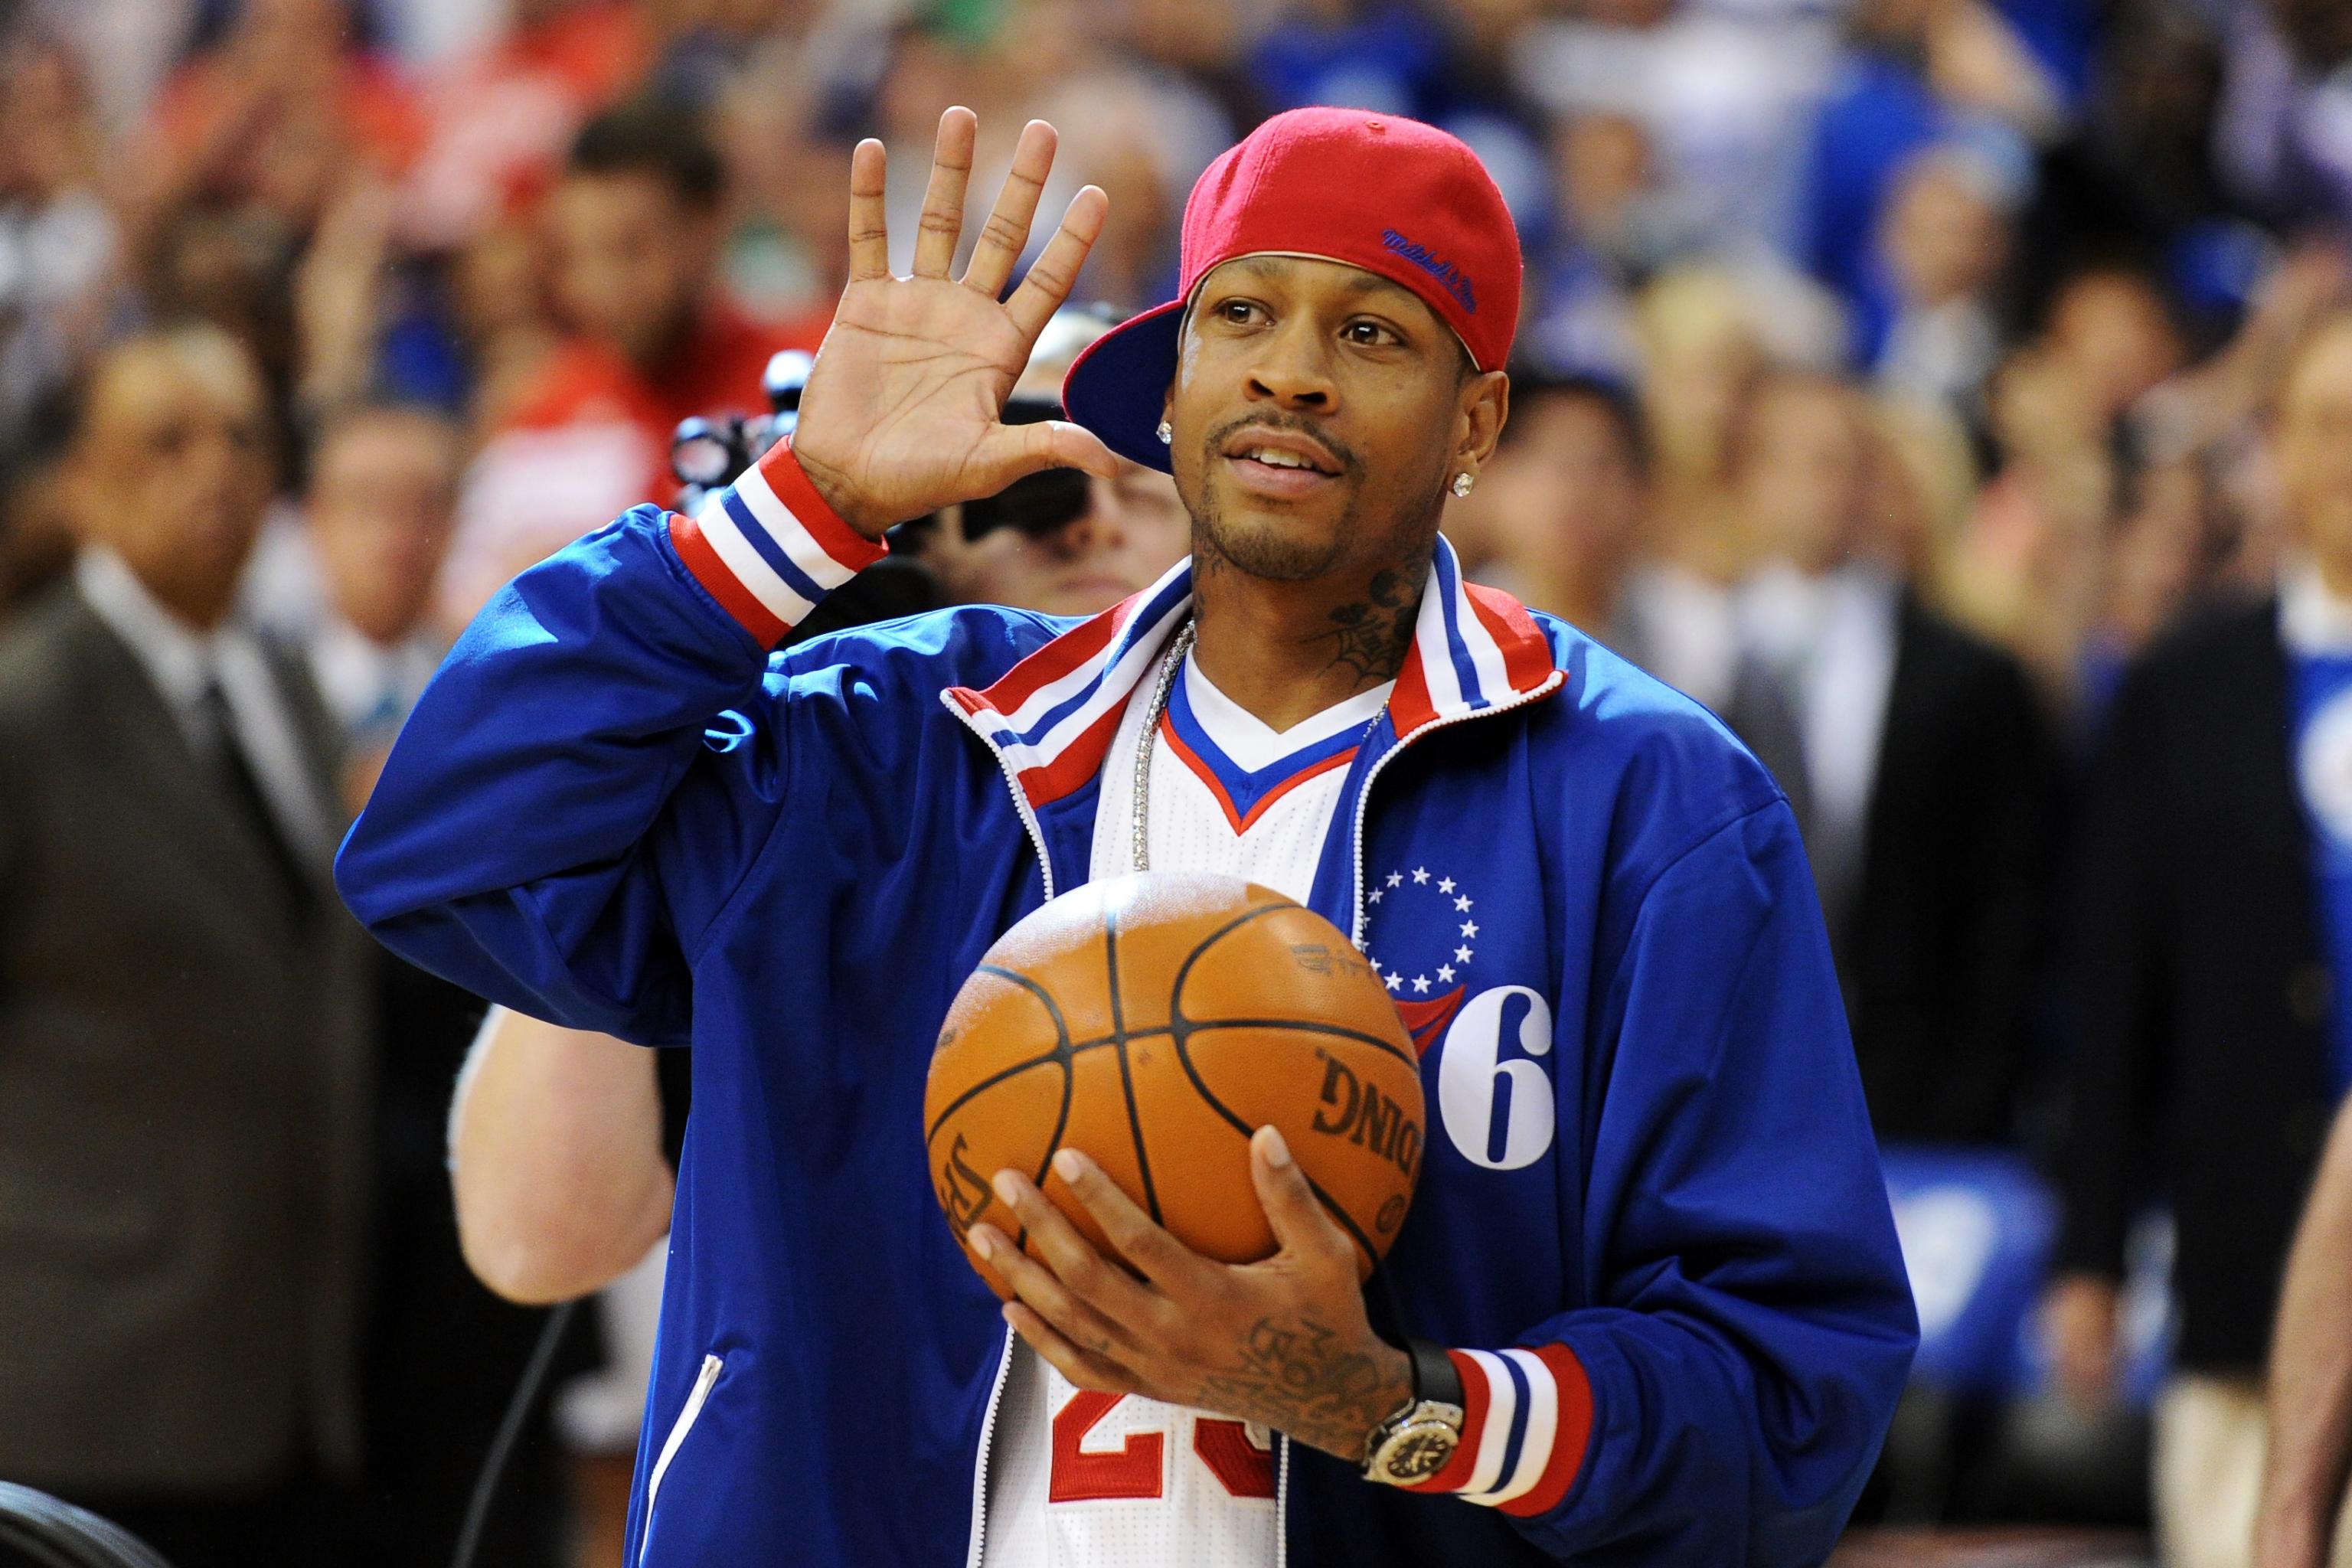 6 Iverson Jersey?? : r/sixers